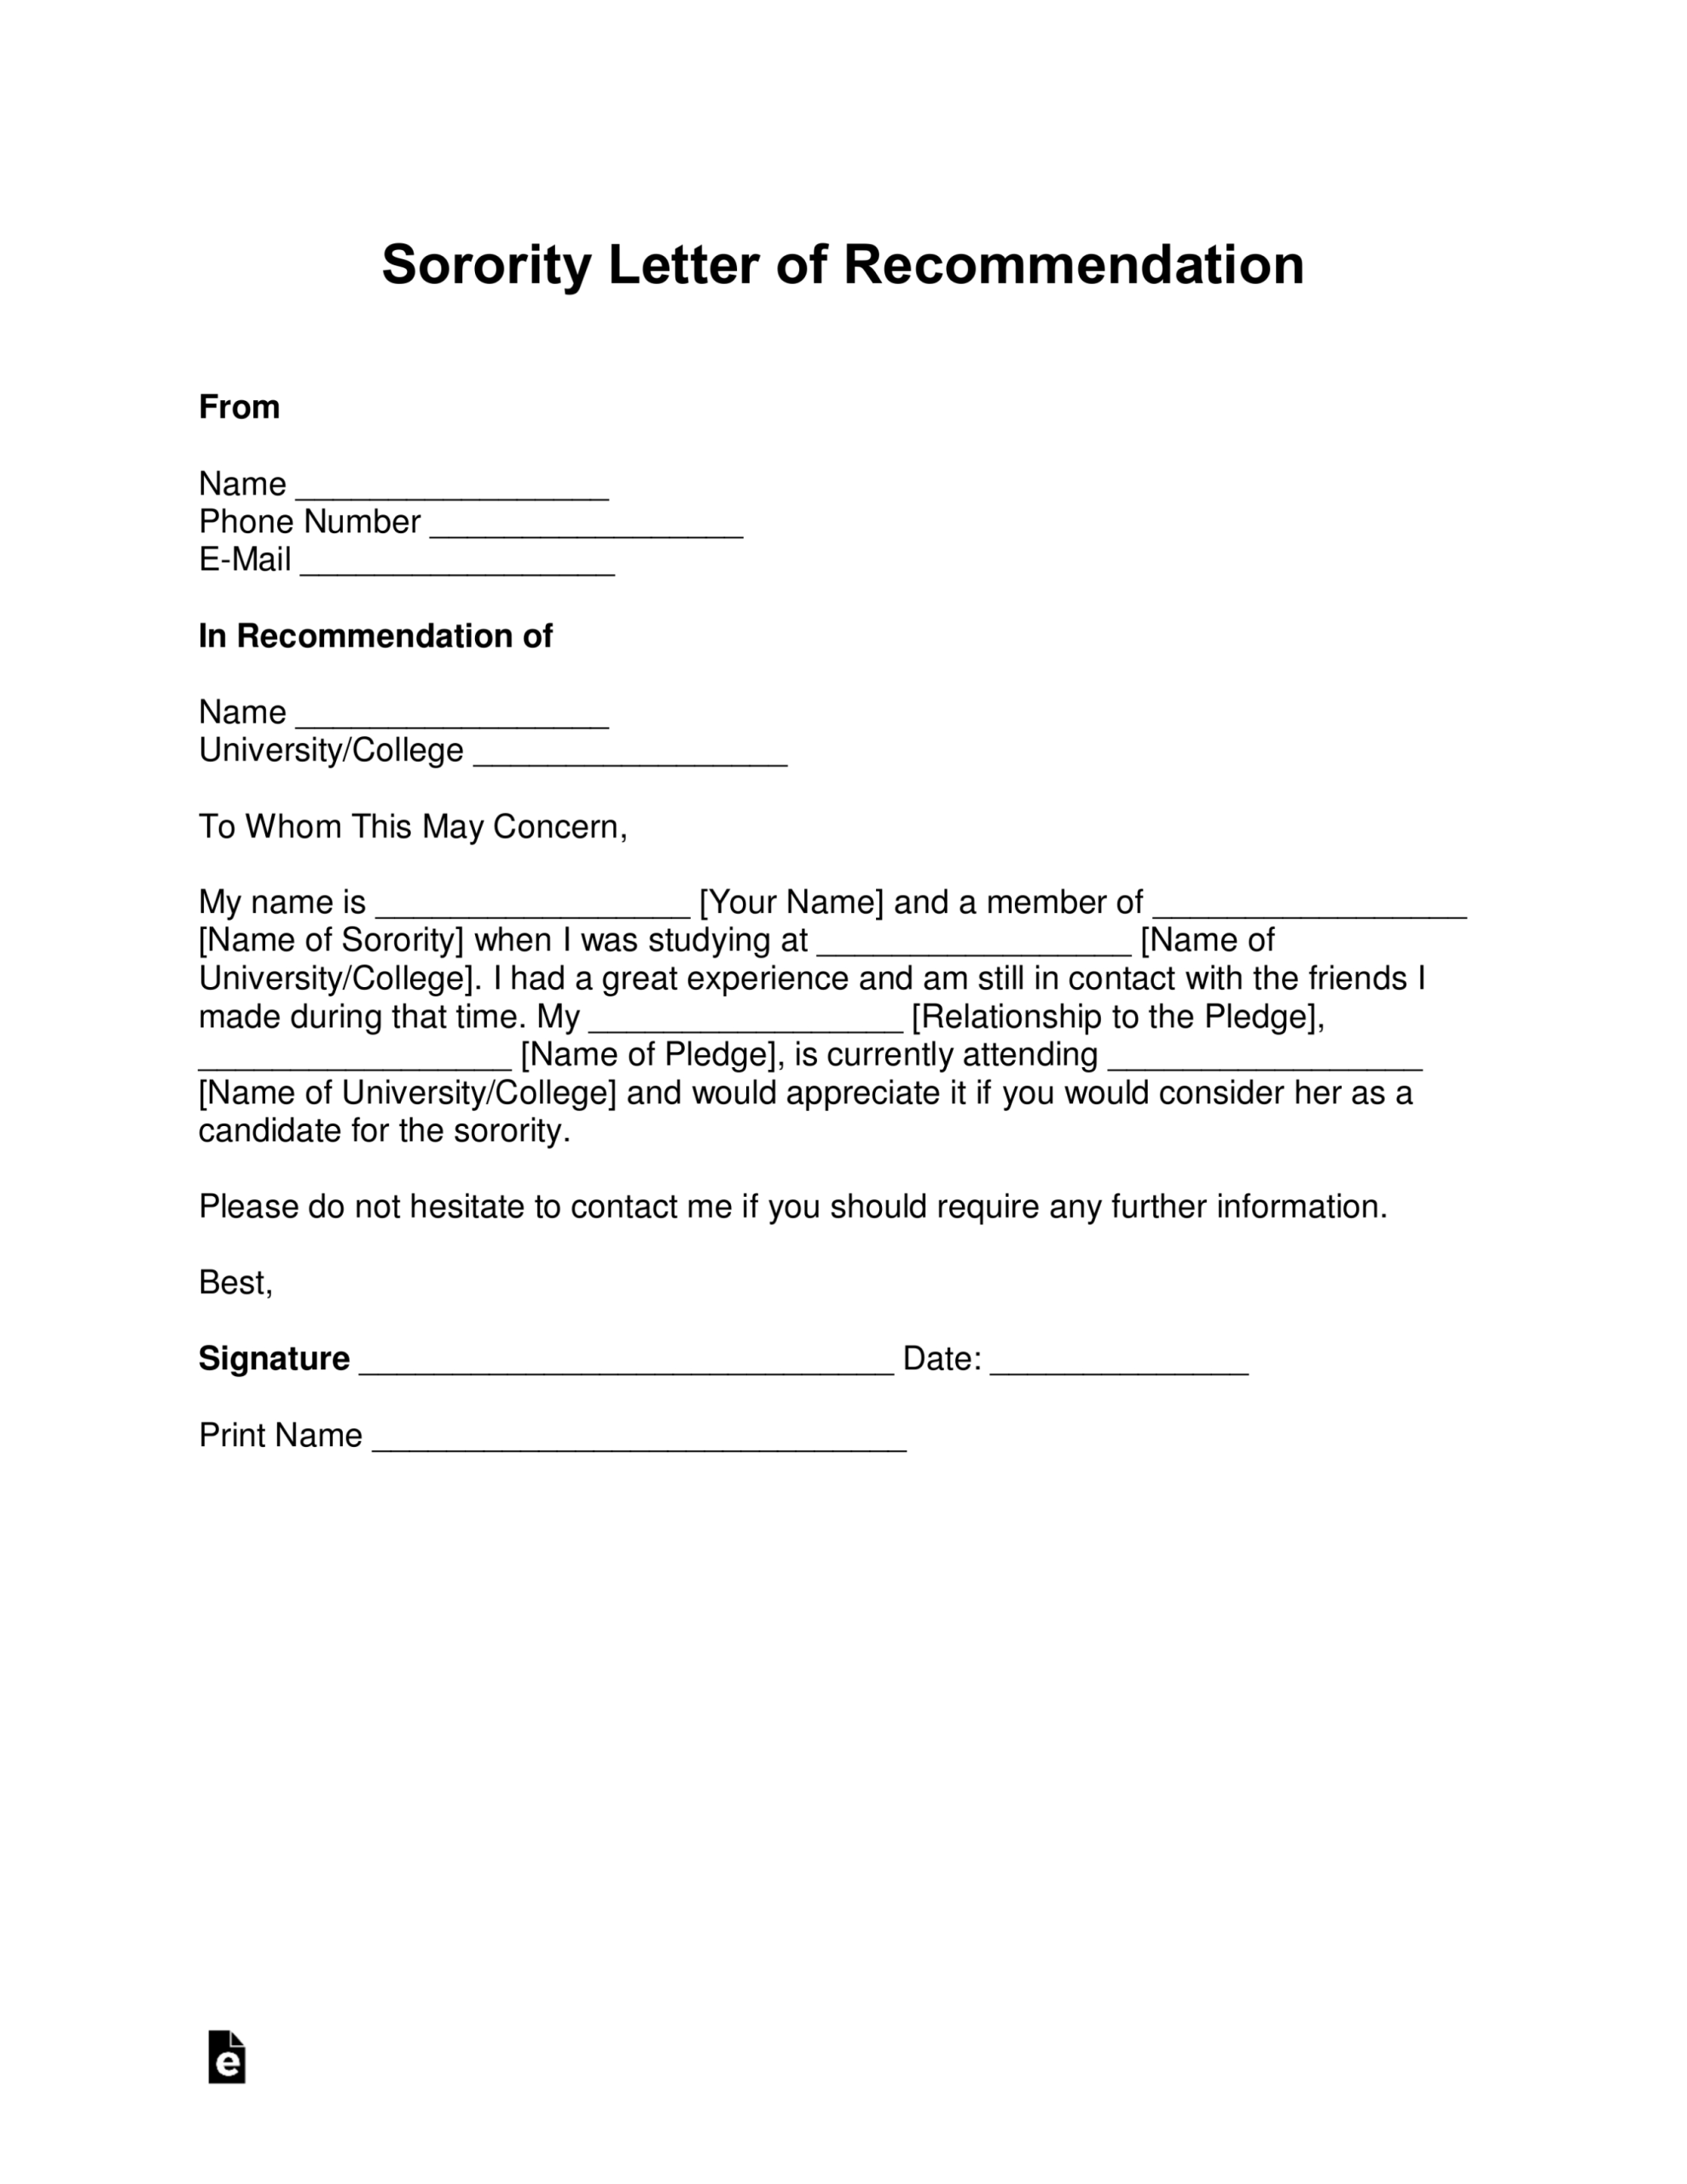 Free Sorority Recommendation Letter Template – With Samples – Pdf Intended For Letter Of Recommendation Request Template